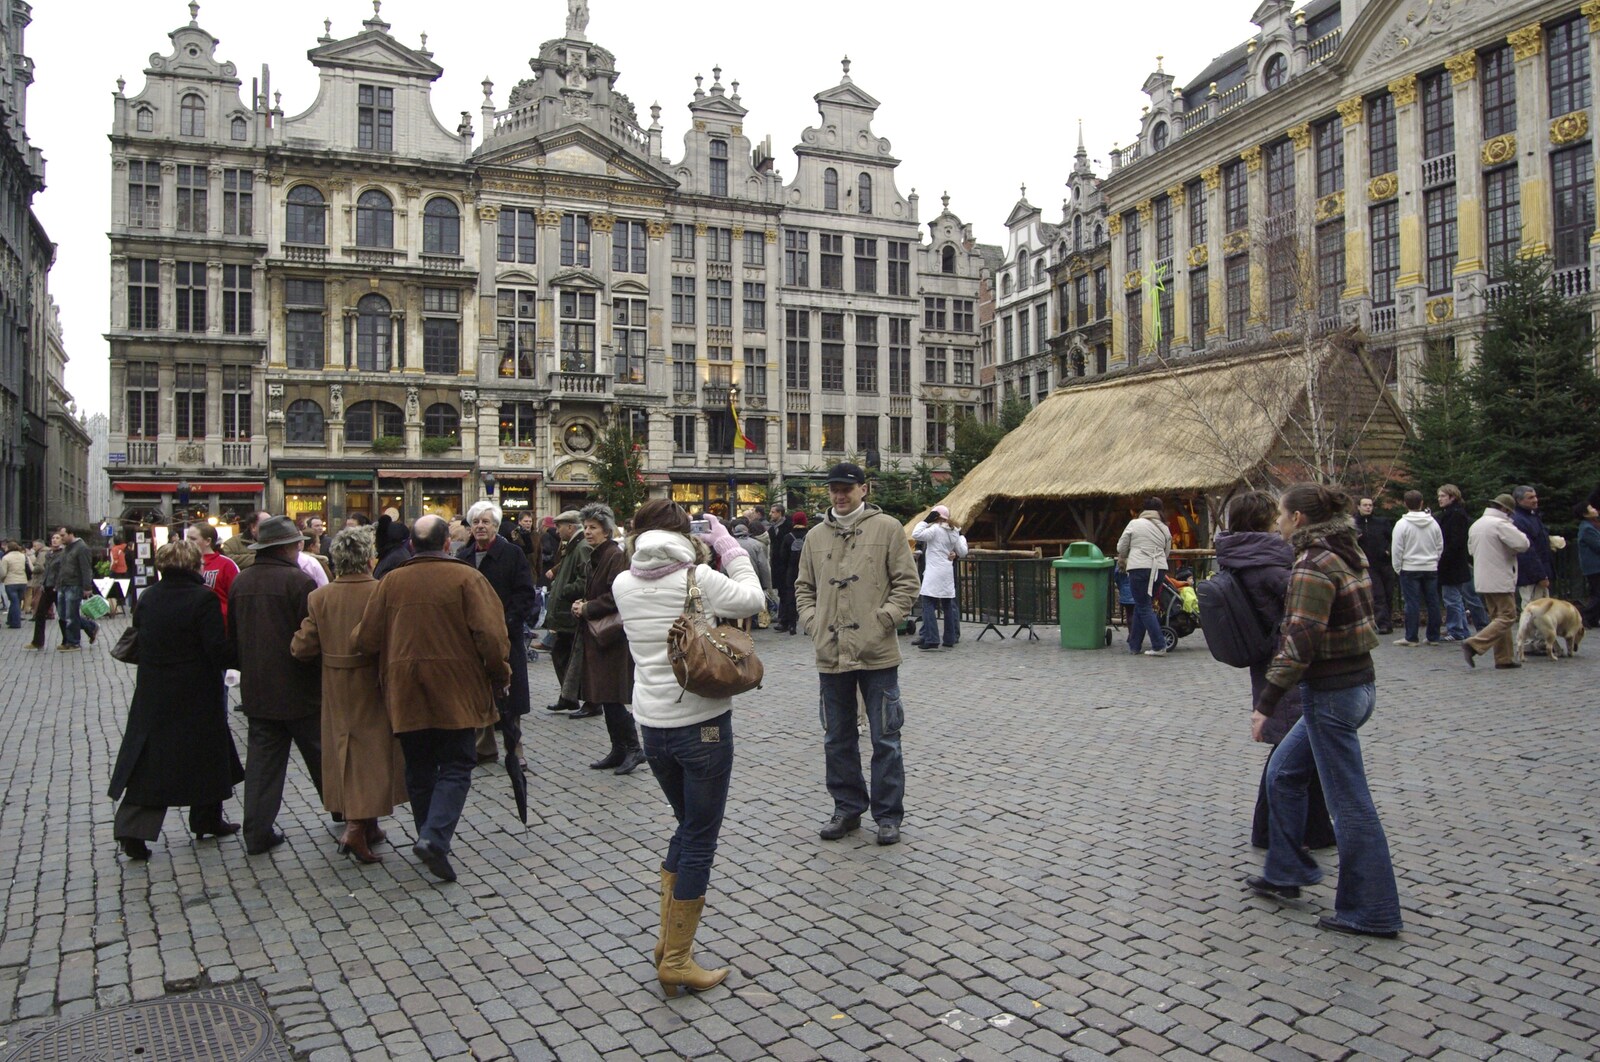 Tourists on the Grand Place from The Christmas Markets of Brussels, Belgium - 1st January 2007